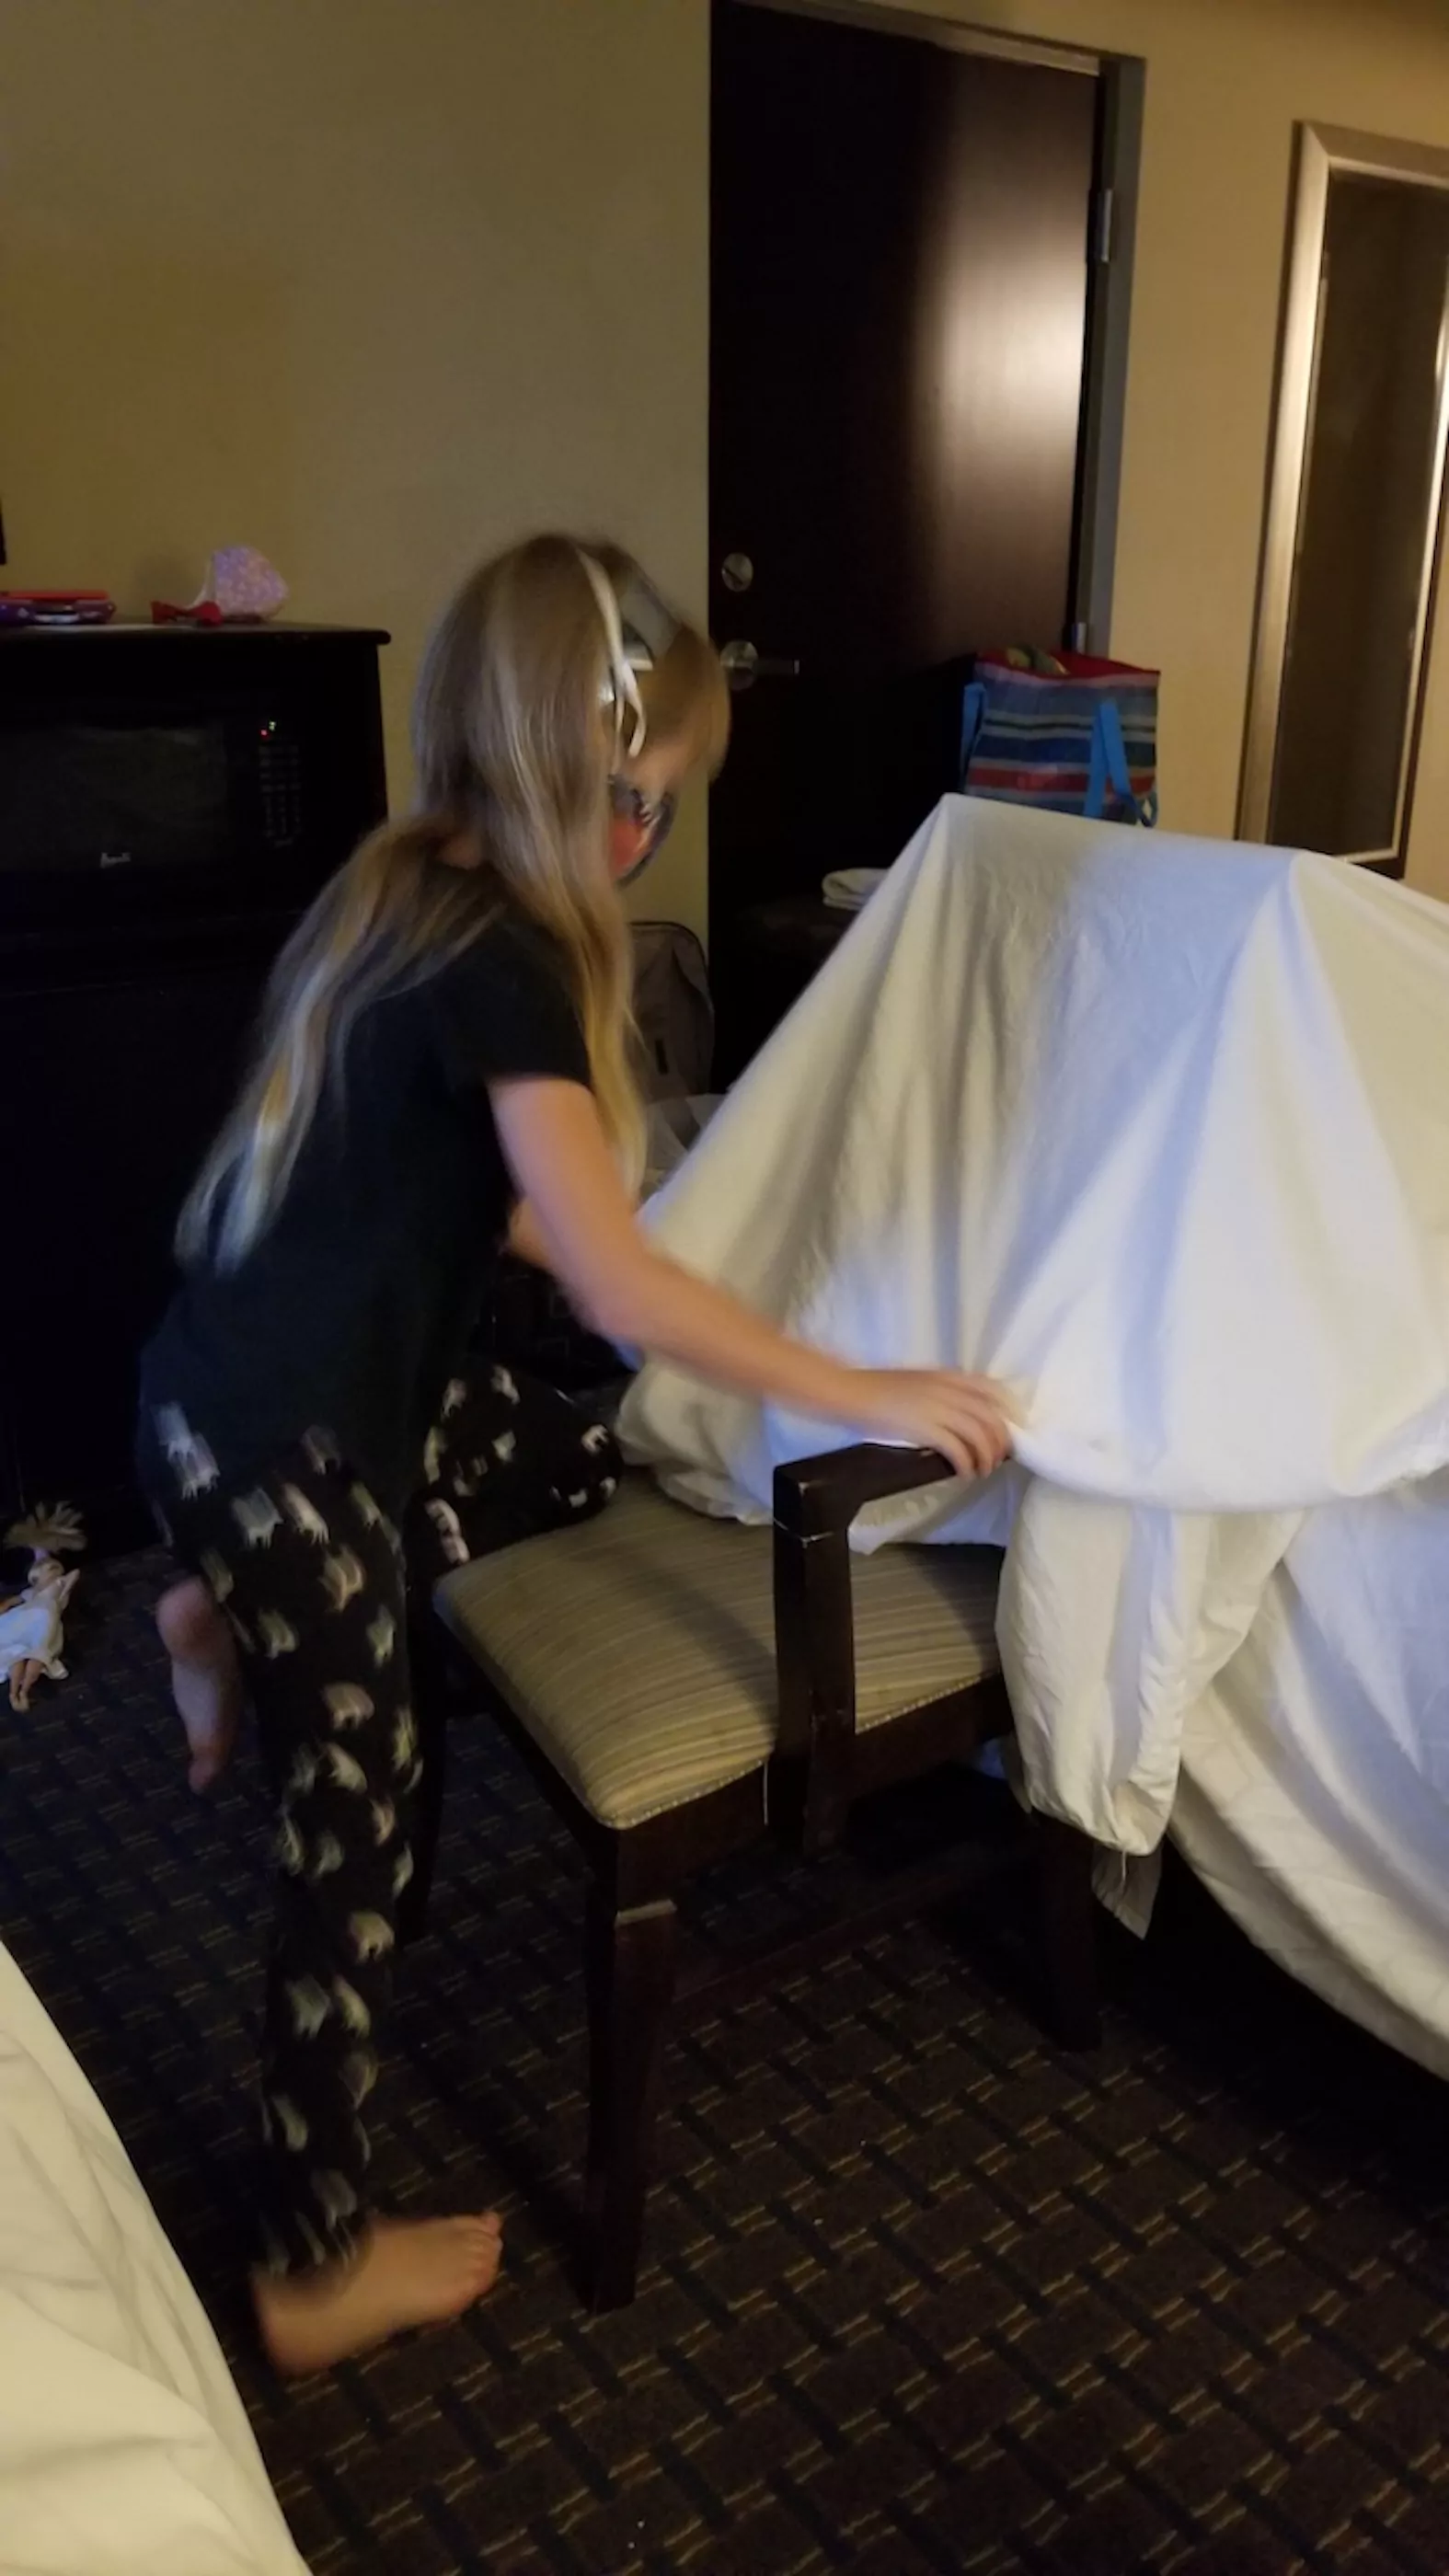 make a fort from blankets and chairs for a fun thing to do in a hotel on vacation